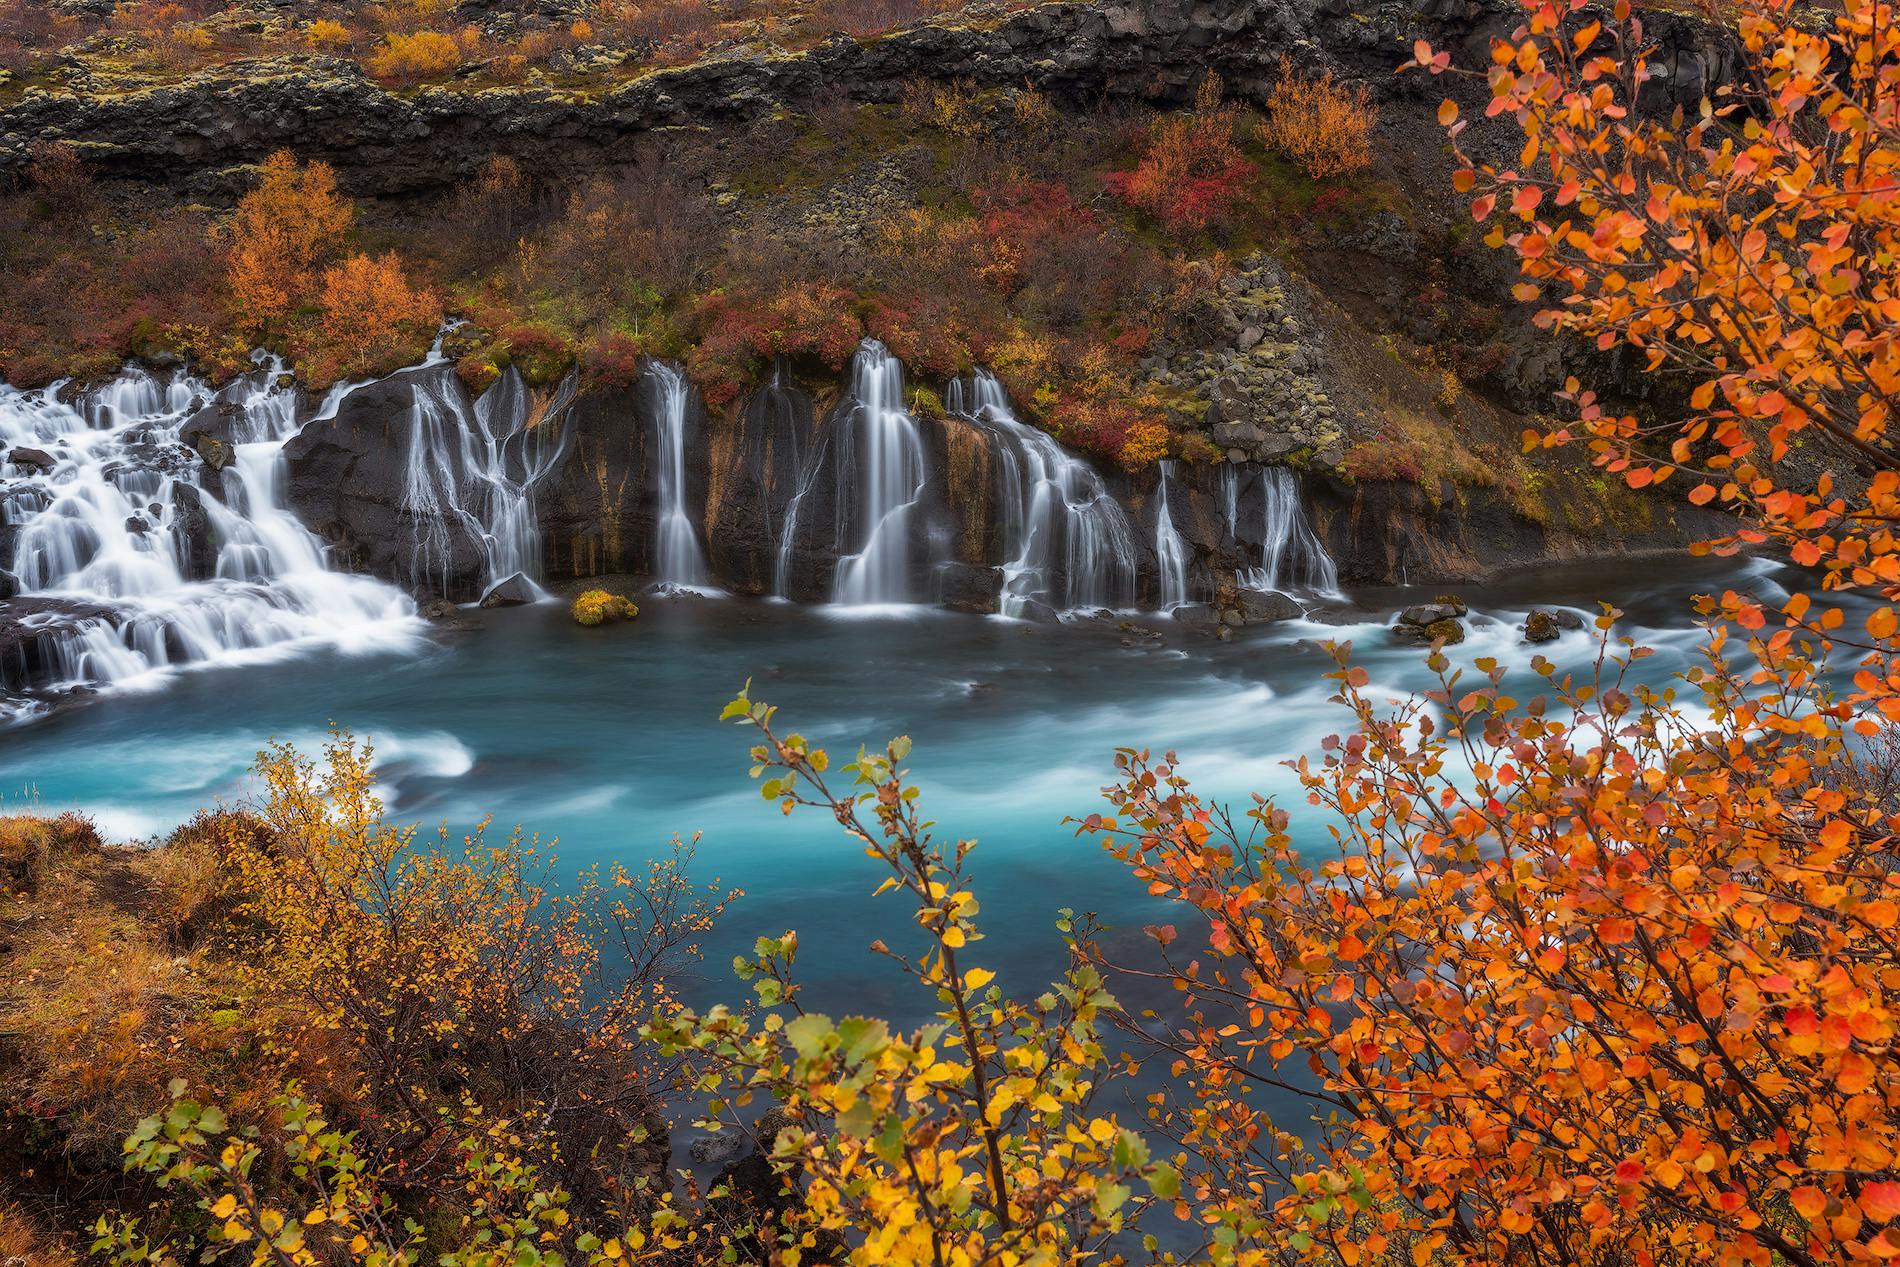 Hraunfossar is known as 'Lava Falls' in English.